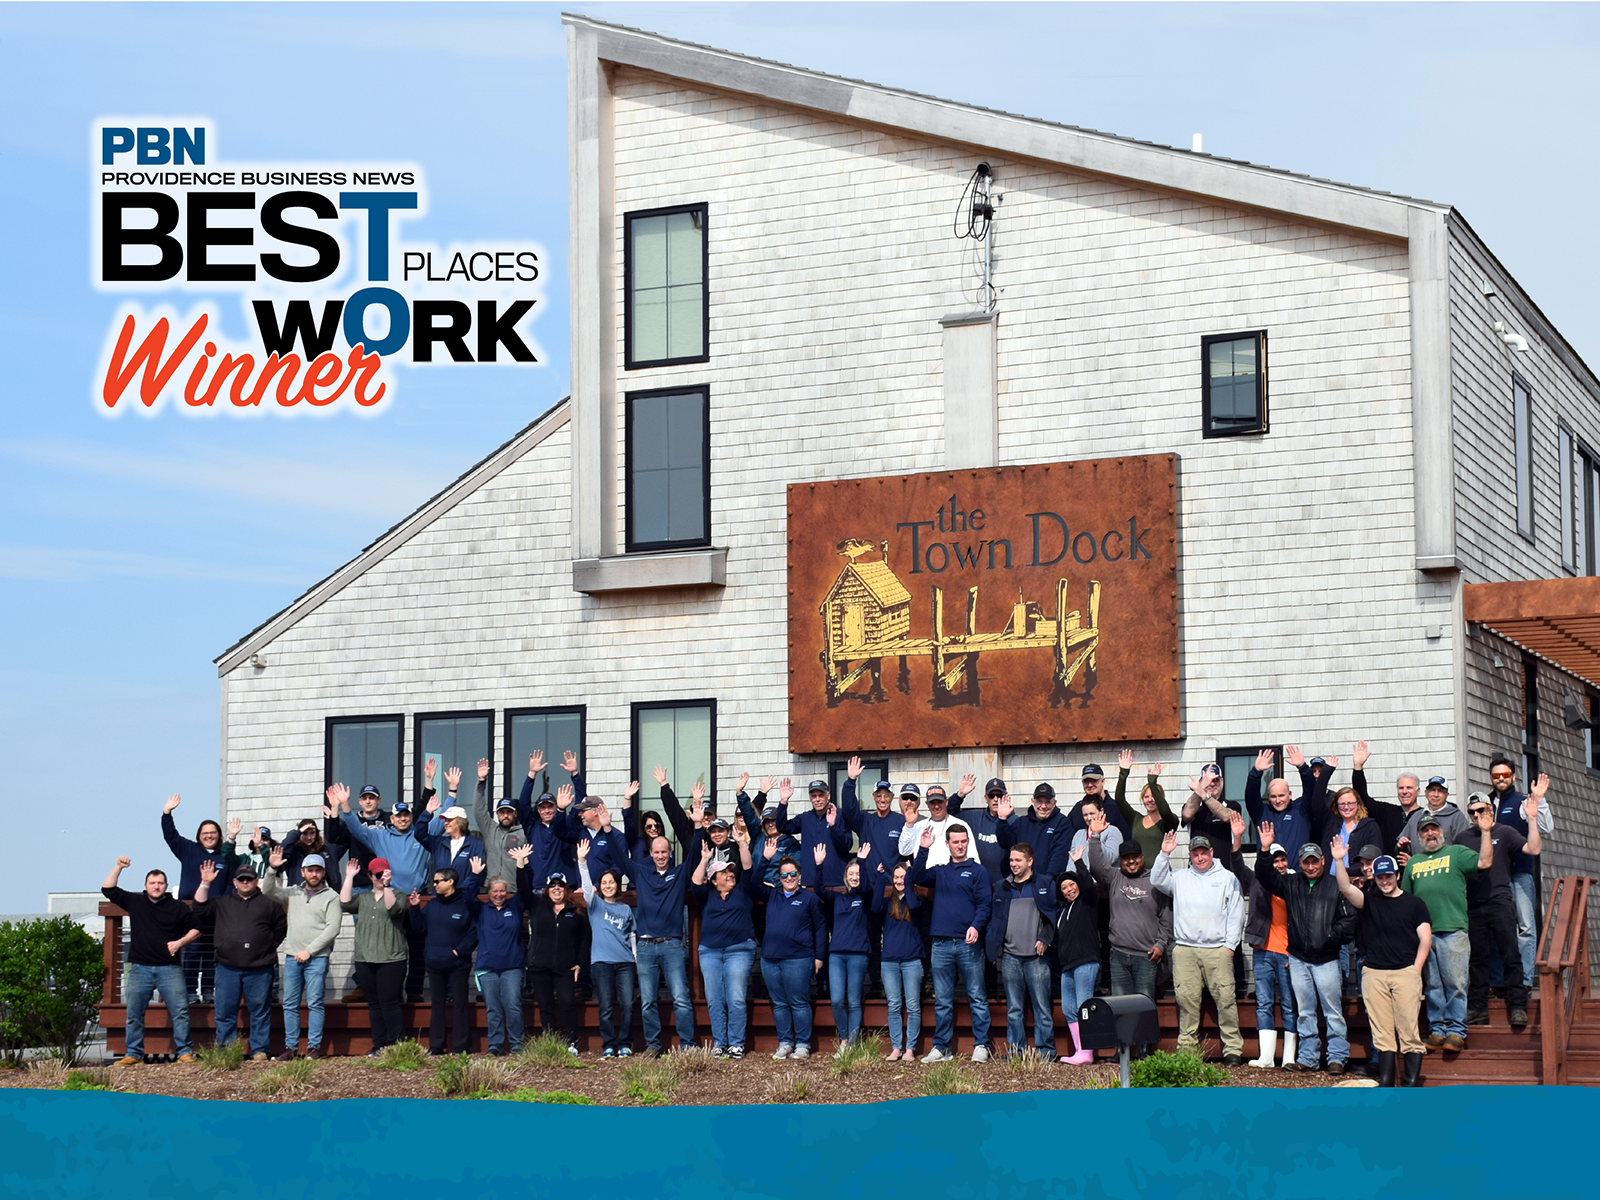 The Town Dock is one of Rhode Island's Best Places to Work for multiple years in a row! We have great Rhode Island jobs and fishing industry jobs.